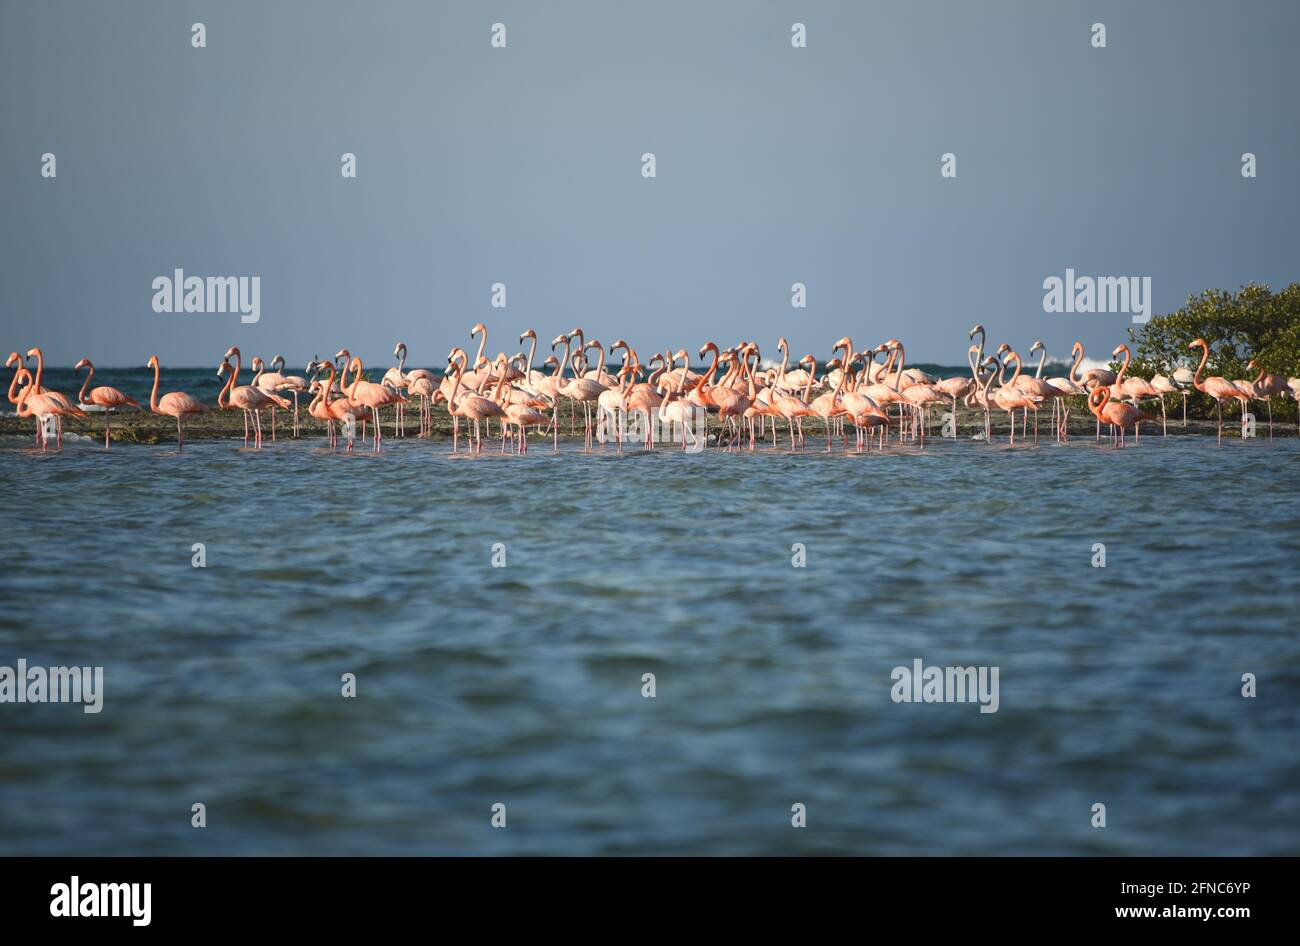 A large format image of a group of beautifully colorful Flamingos standing on a sea shoal on the remote Bahama island of Mayaguana. Stock Photo